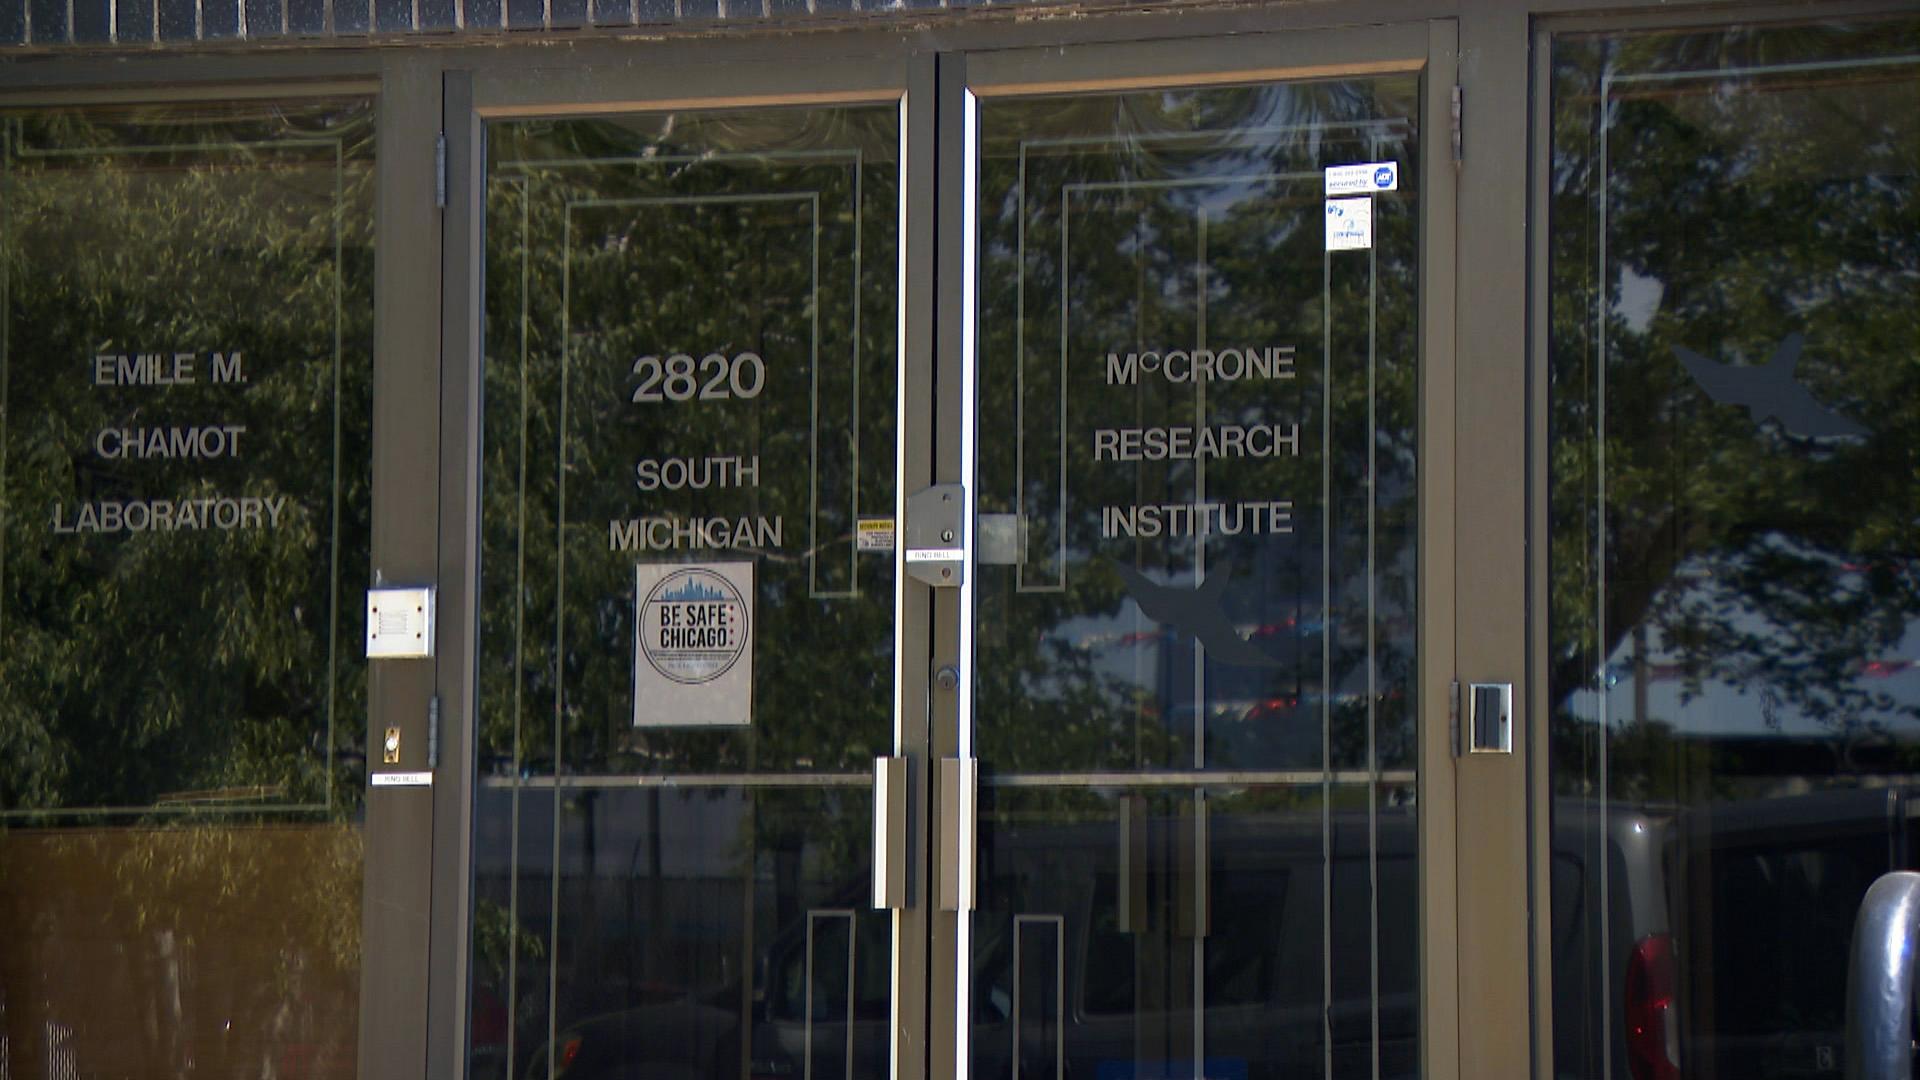 The McCrone Research Institute (WTTW News)